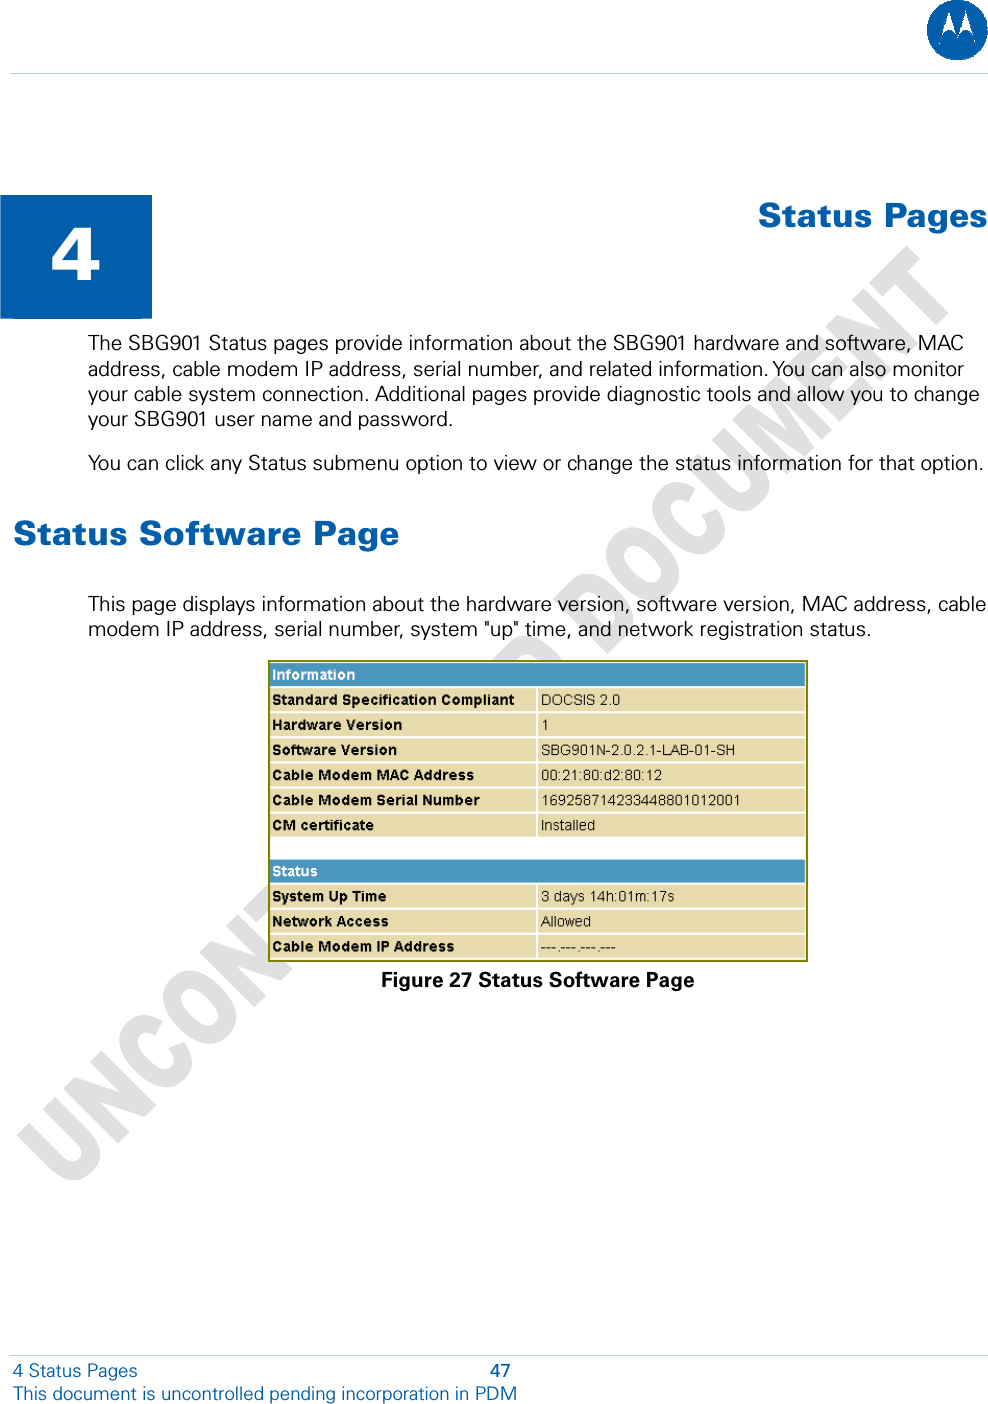    4  Status PagesThe SBG901 Status pages provide information about the SBG901 hardware and software, MAC address, cable modem IP address, serial number, and related information. You can also monitor your cable system connection. Additional pages provide diagnostic tools and allow you to change your SBG901 user name and password. You can click any Status submenu option to view or change the status information for that option. Status Software Page This page displays information about the hardware version, software version, MAC address, cable modem IP address, serial number, system &quot;up&quot; time, and network registration status.  Figure 27 Status Software Page 4 Status Pages  47 This document is uncontrolled pending incorporation in PDM  